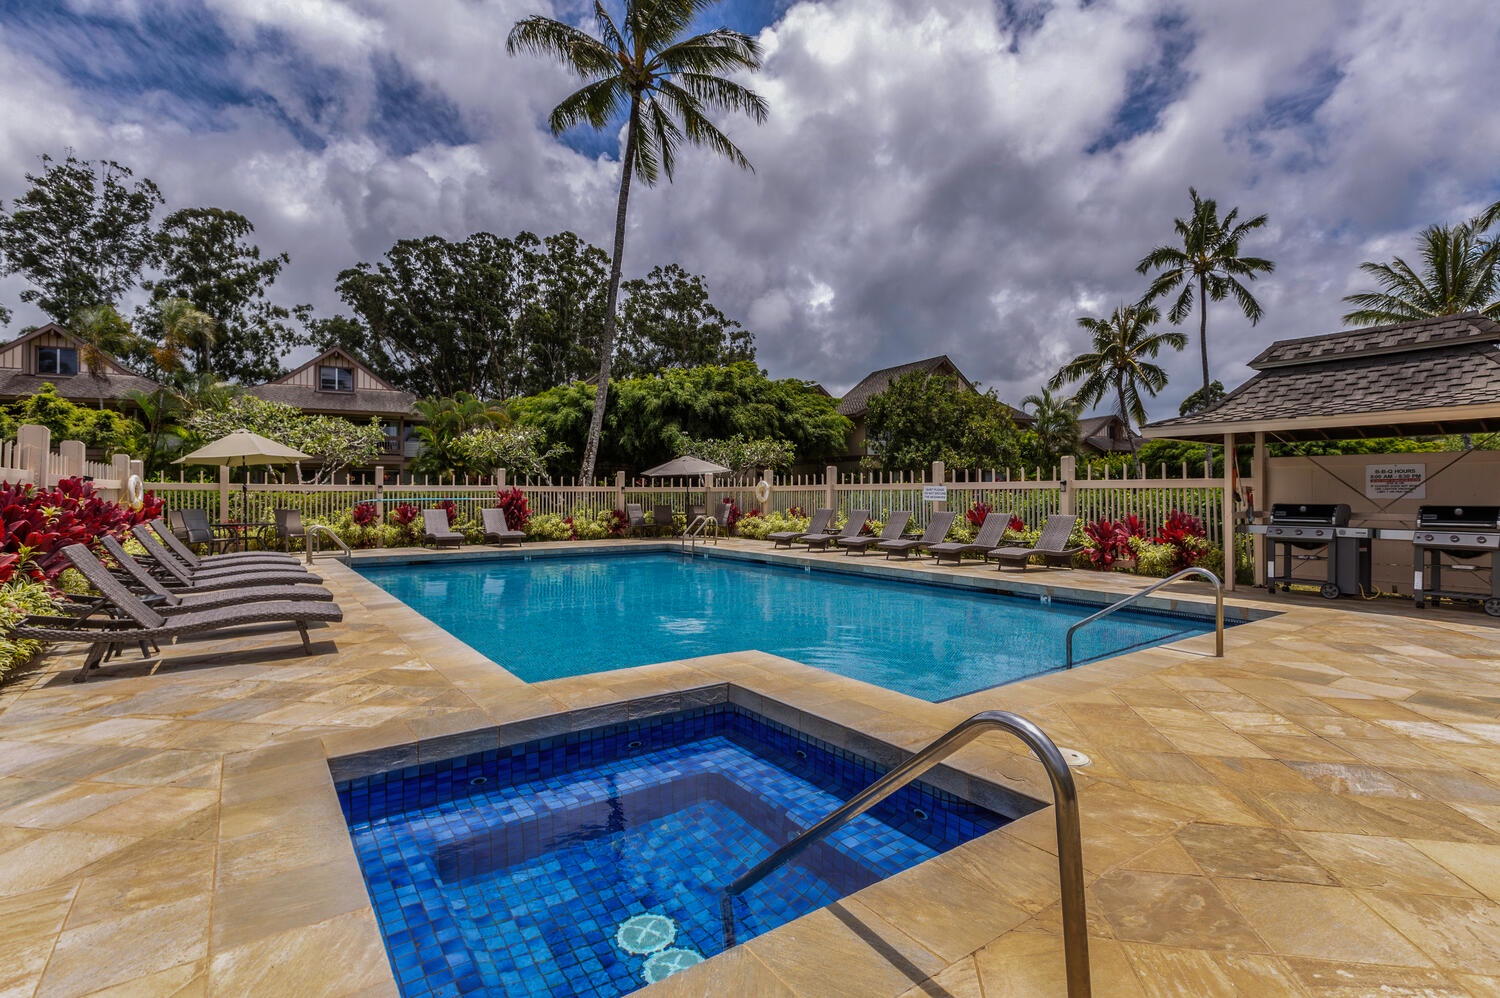 Princeville Vacation Rentals, Hideaway Haven - Take a refreshing dip in the pool under the radiant Hawaiian sun—a true tropical delight.